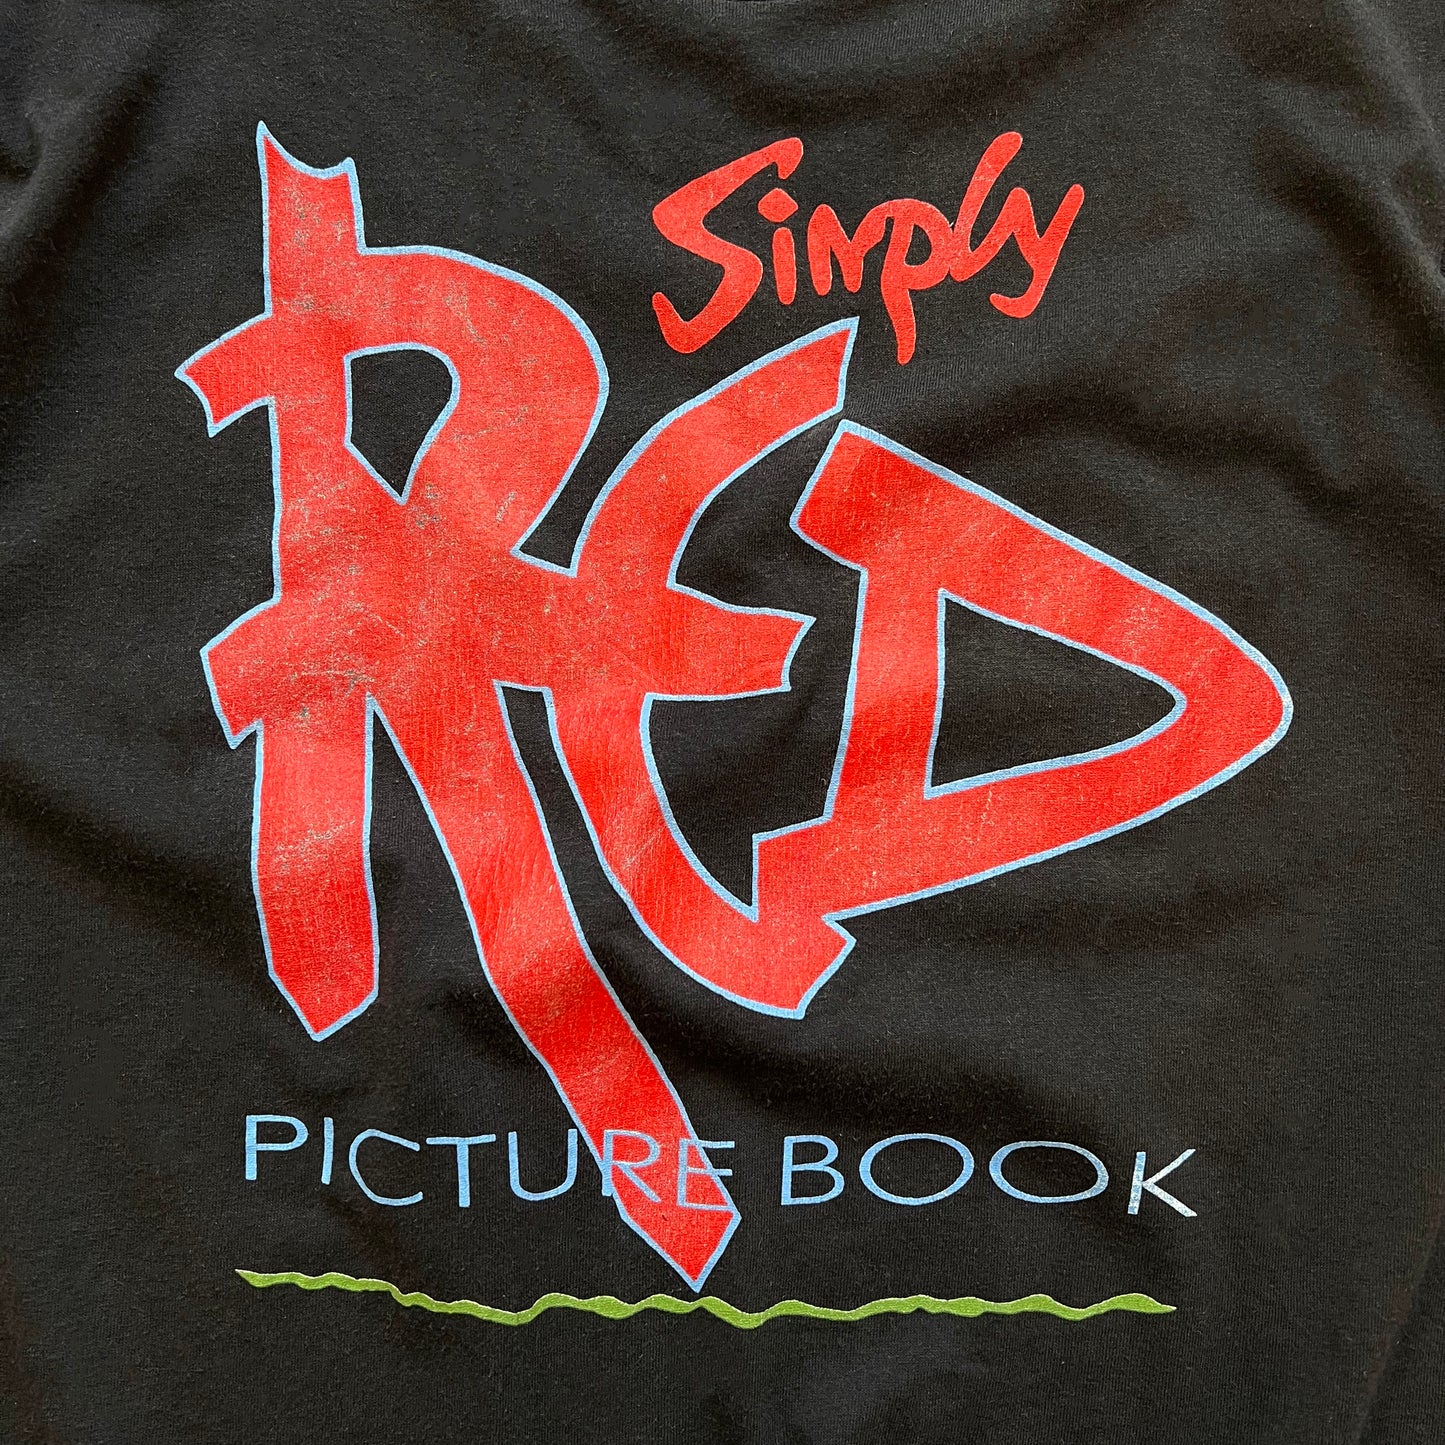 80's SIMPLY RED "PICTURE BOOK" T-SHIRT